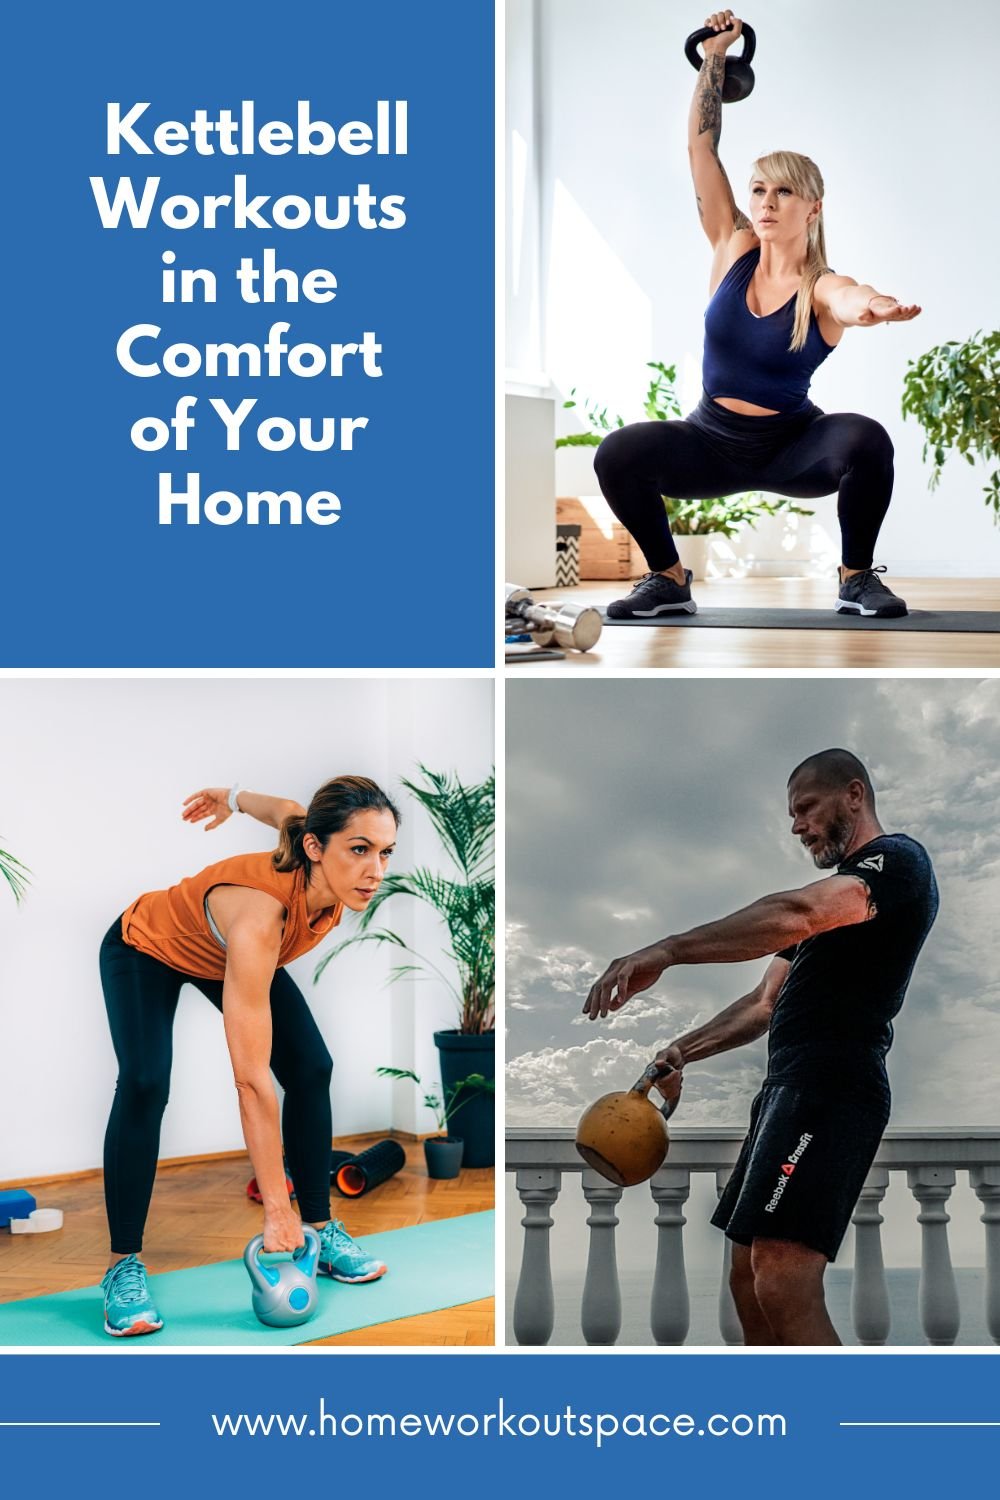 Kettlebell Workouts in the Comfort of Your Home